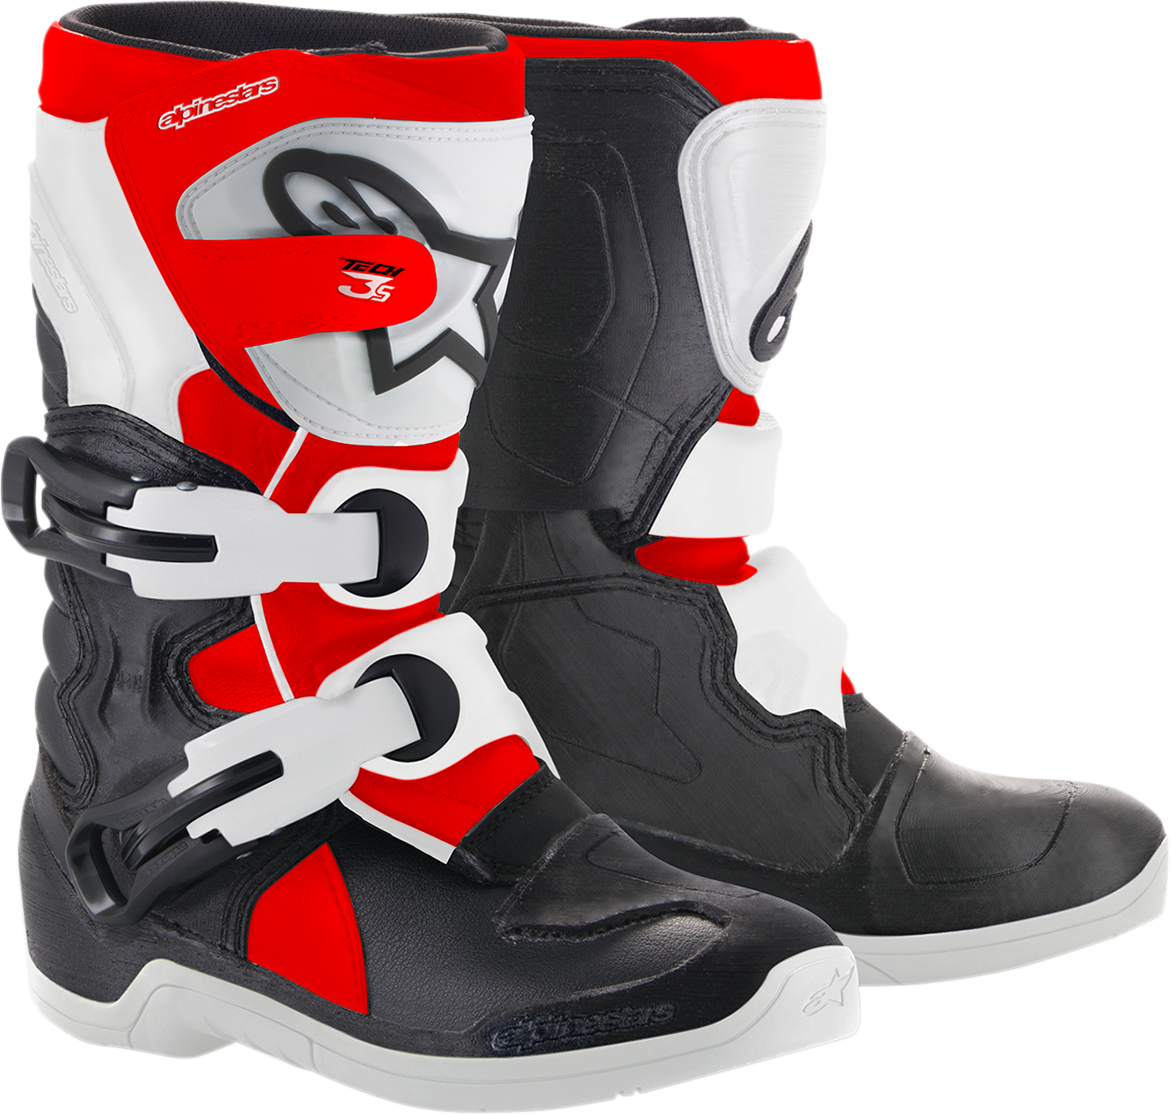 ALPINESTARS Youth Tech 3S Boots - Black/White/Red - US 13 2014518-1231-13